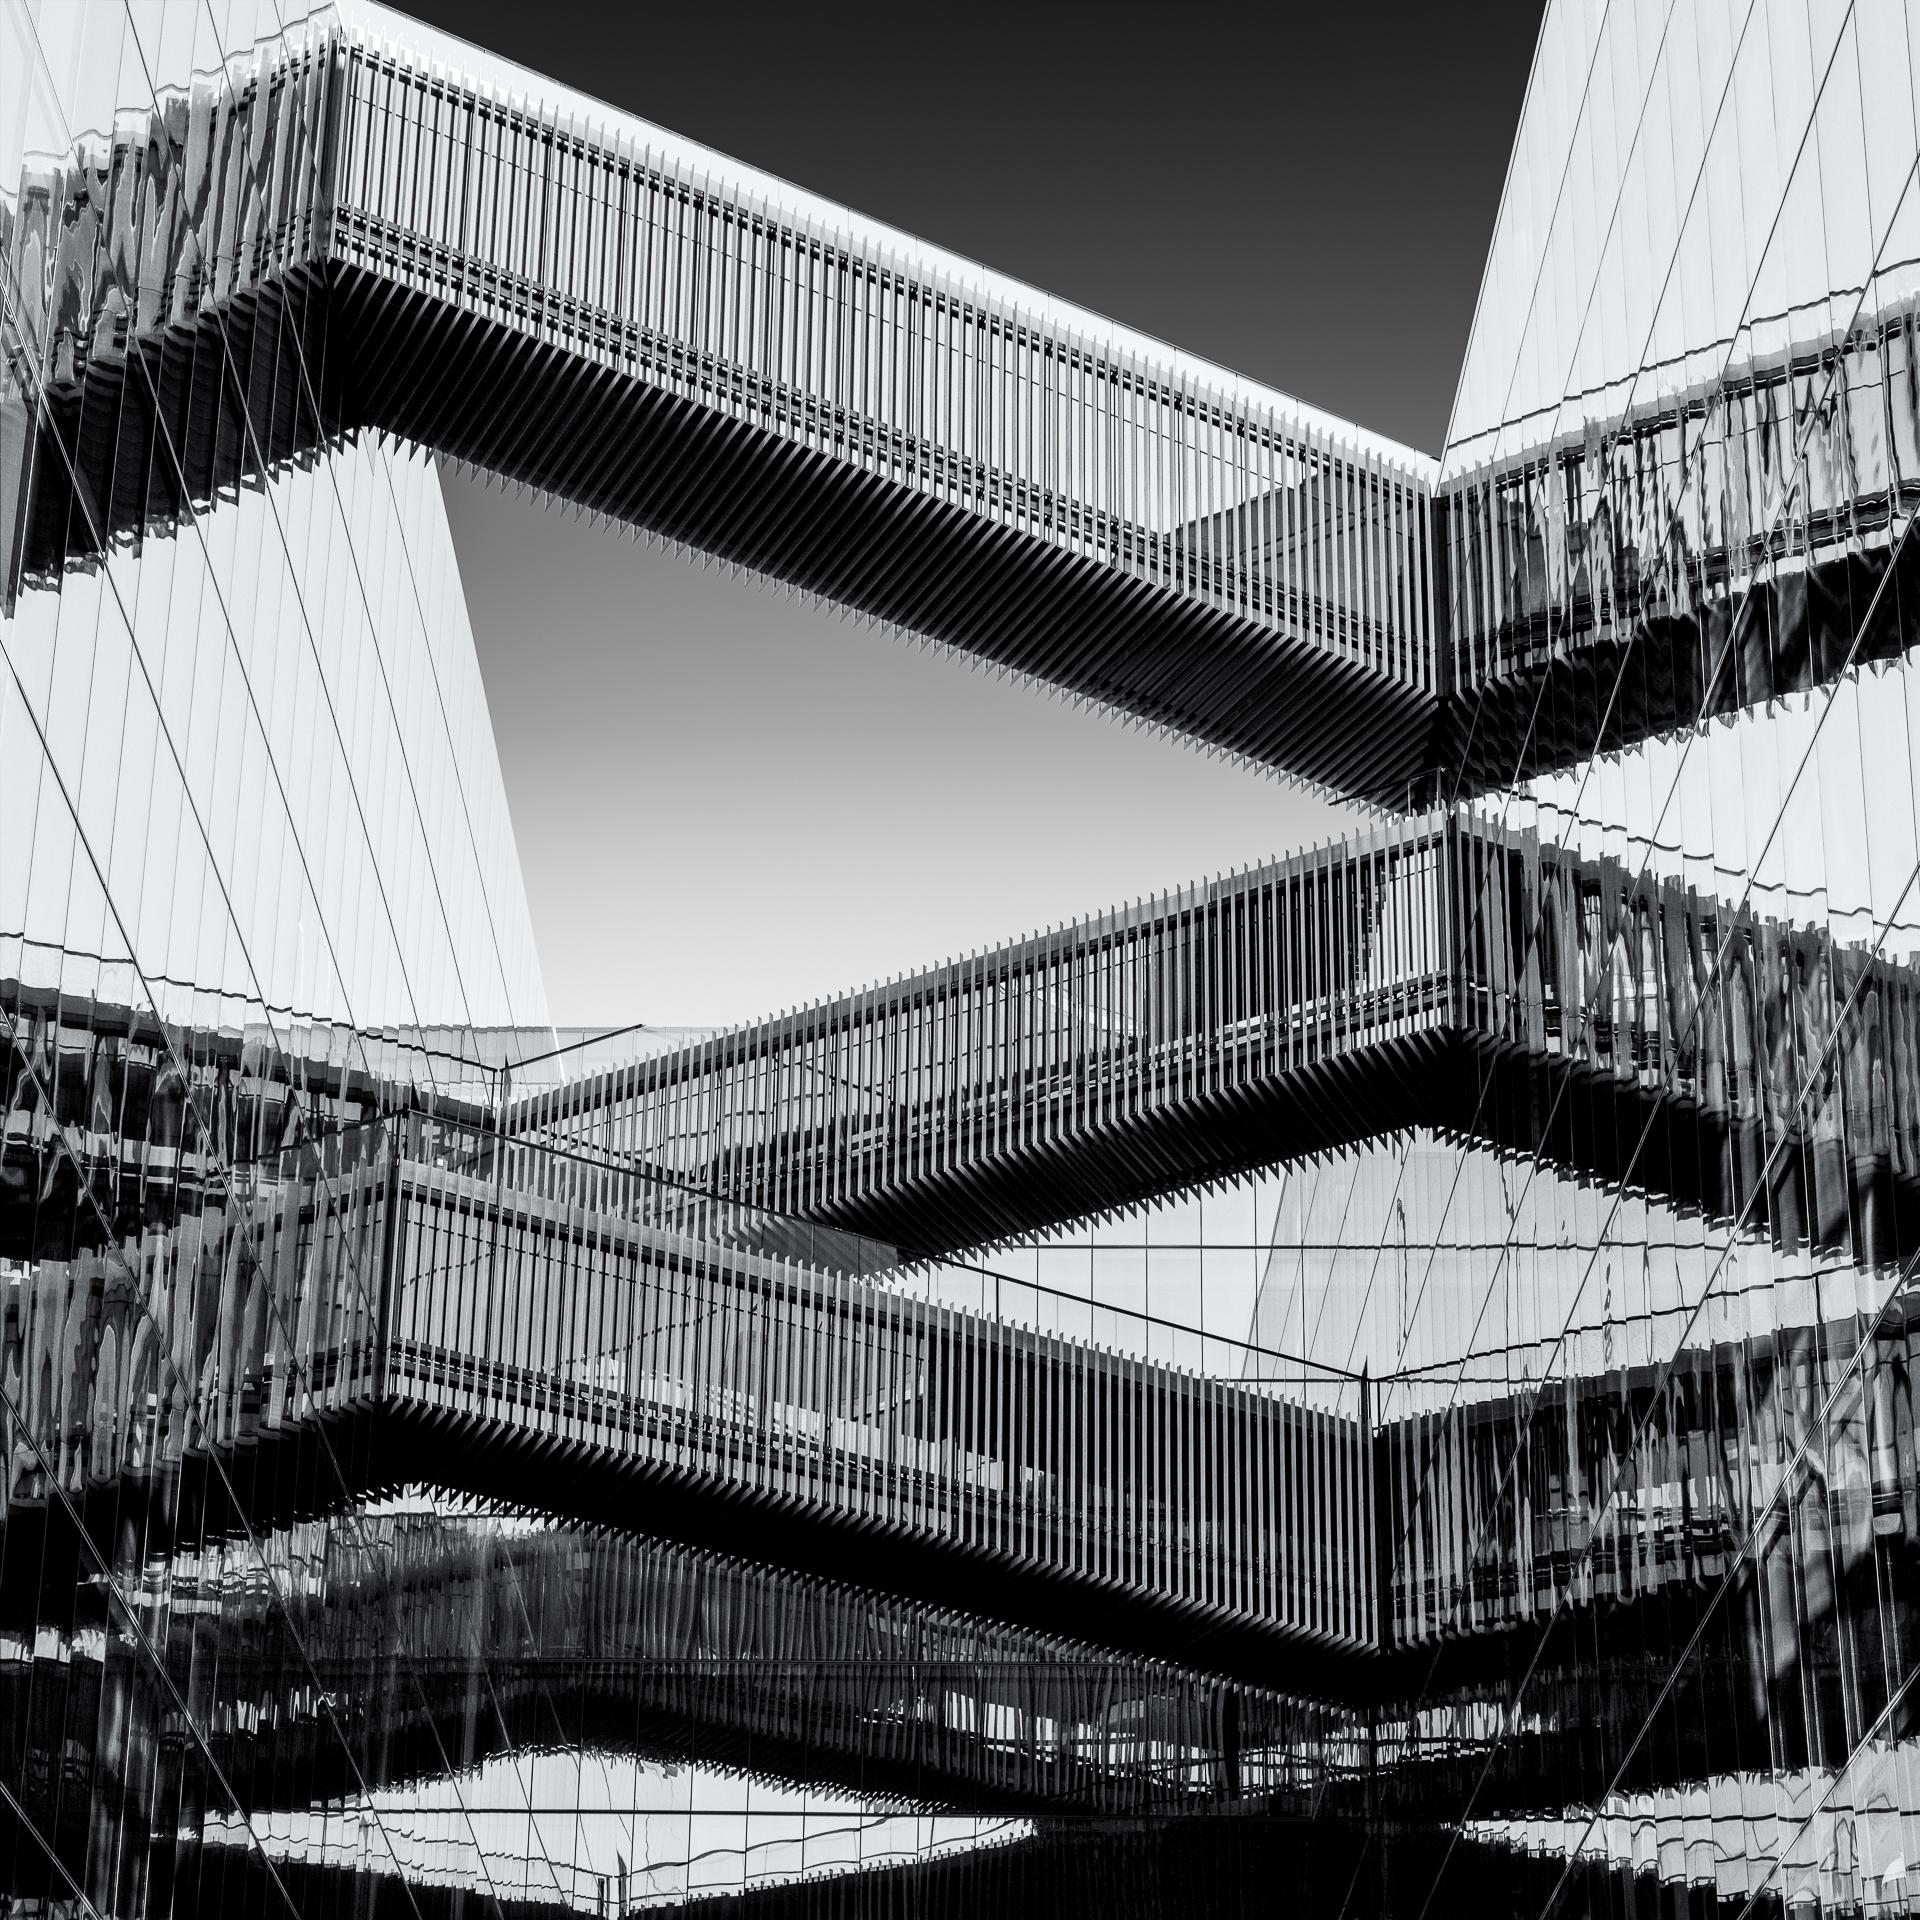 New York Photography Awards Winner - GEOTECTURE